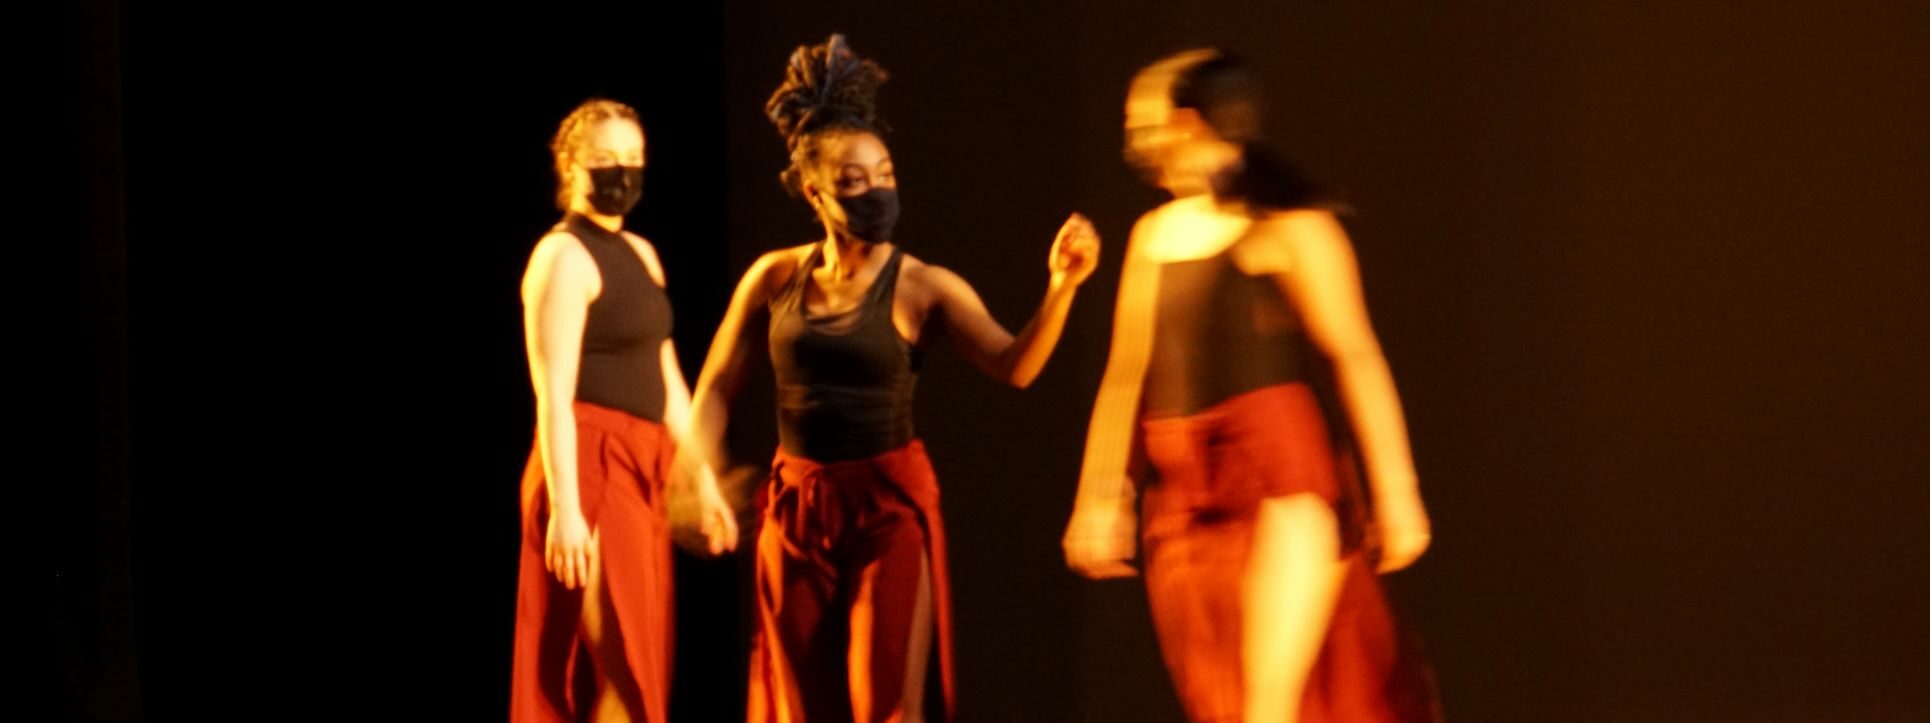 Intersections, running March 12 and 13, features new choreographic works by four of the Department of Dance’s MFA students, performed by the department’s resident student company, the York Dance Ensemble